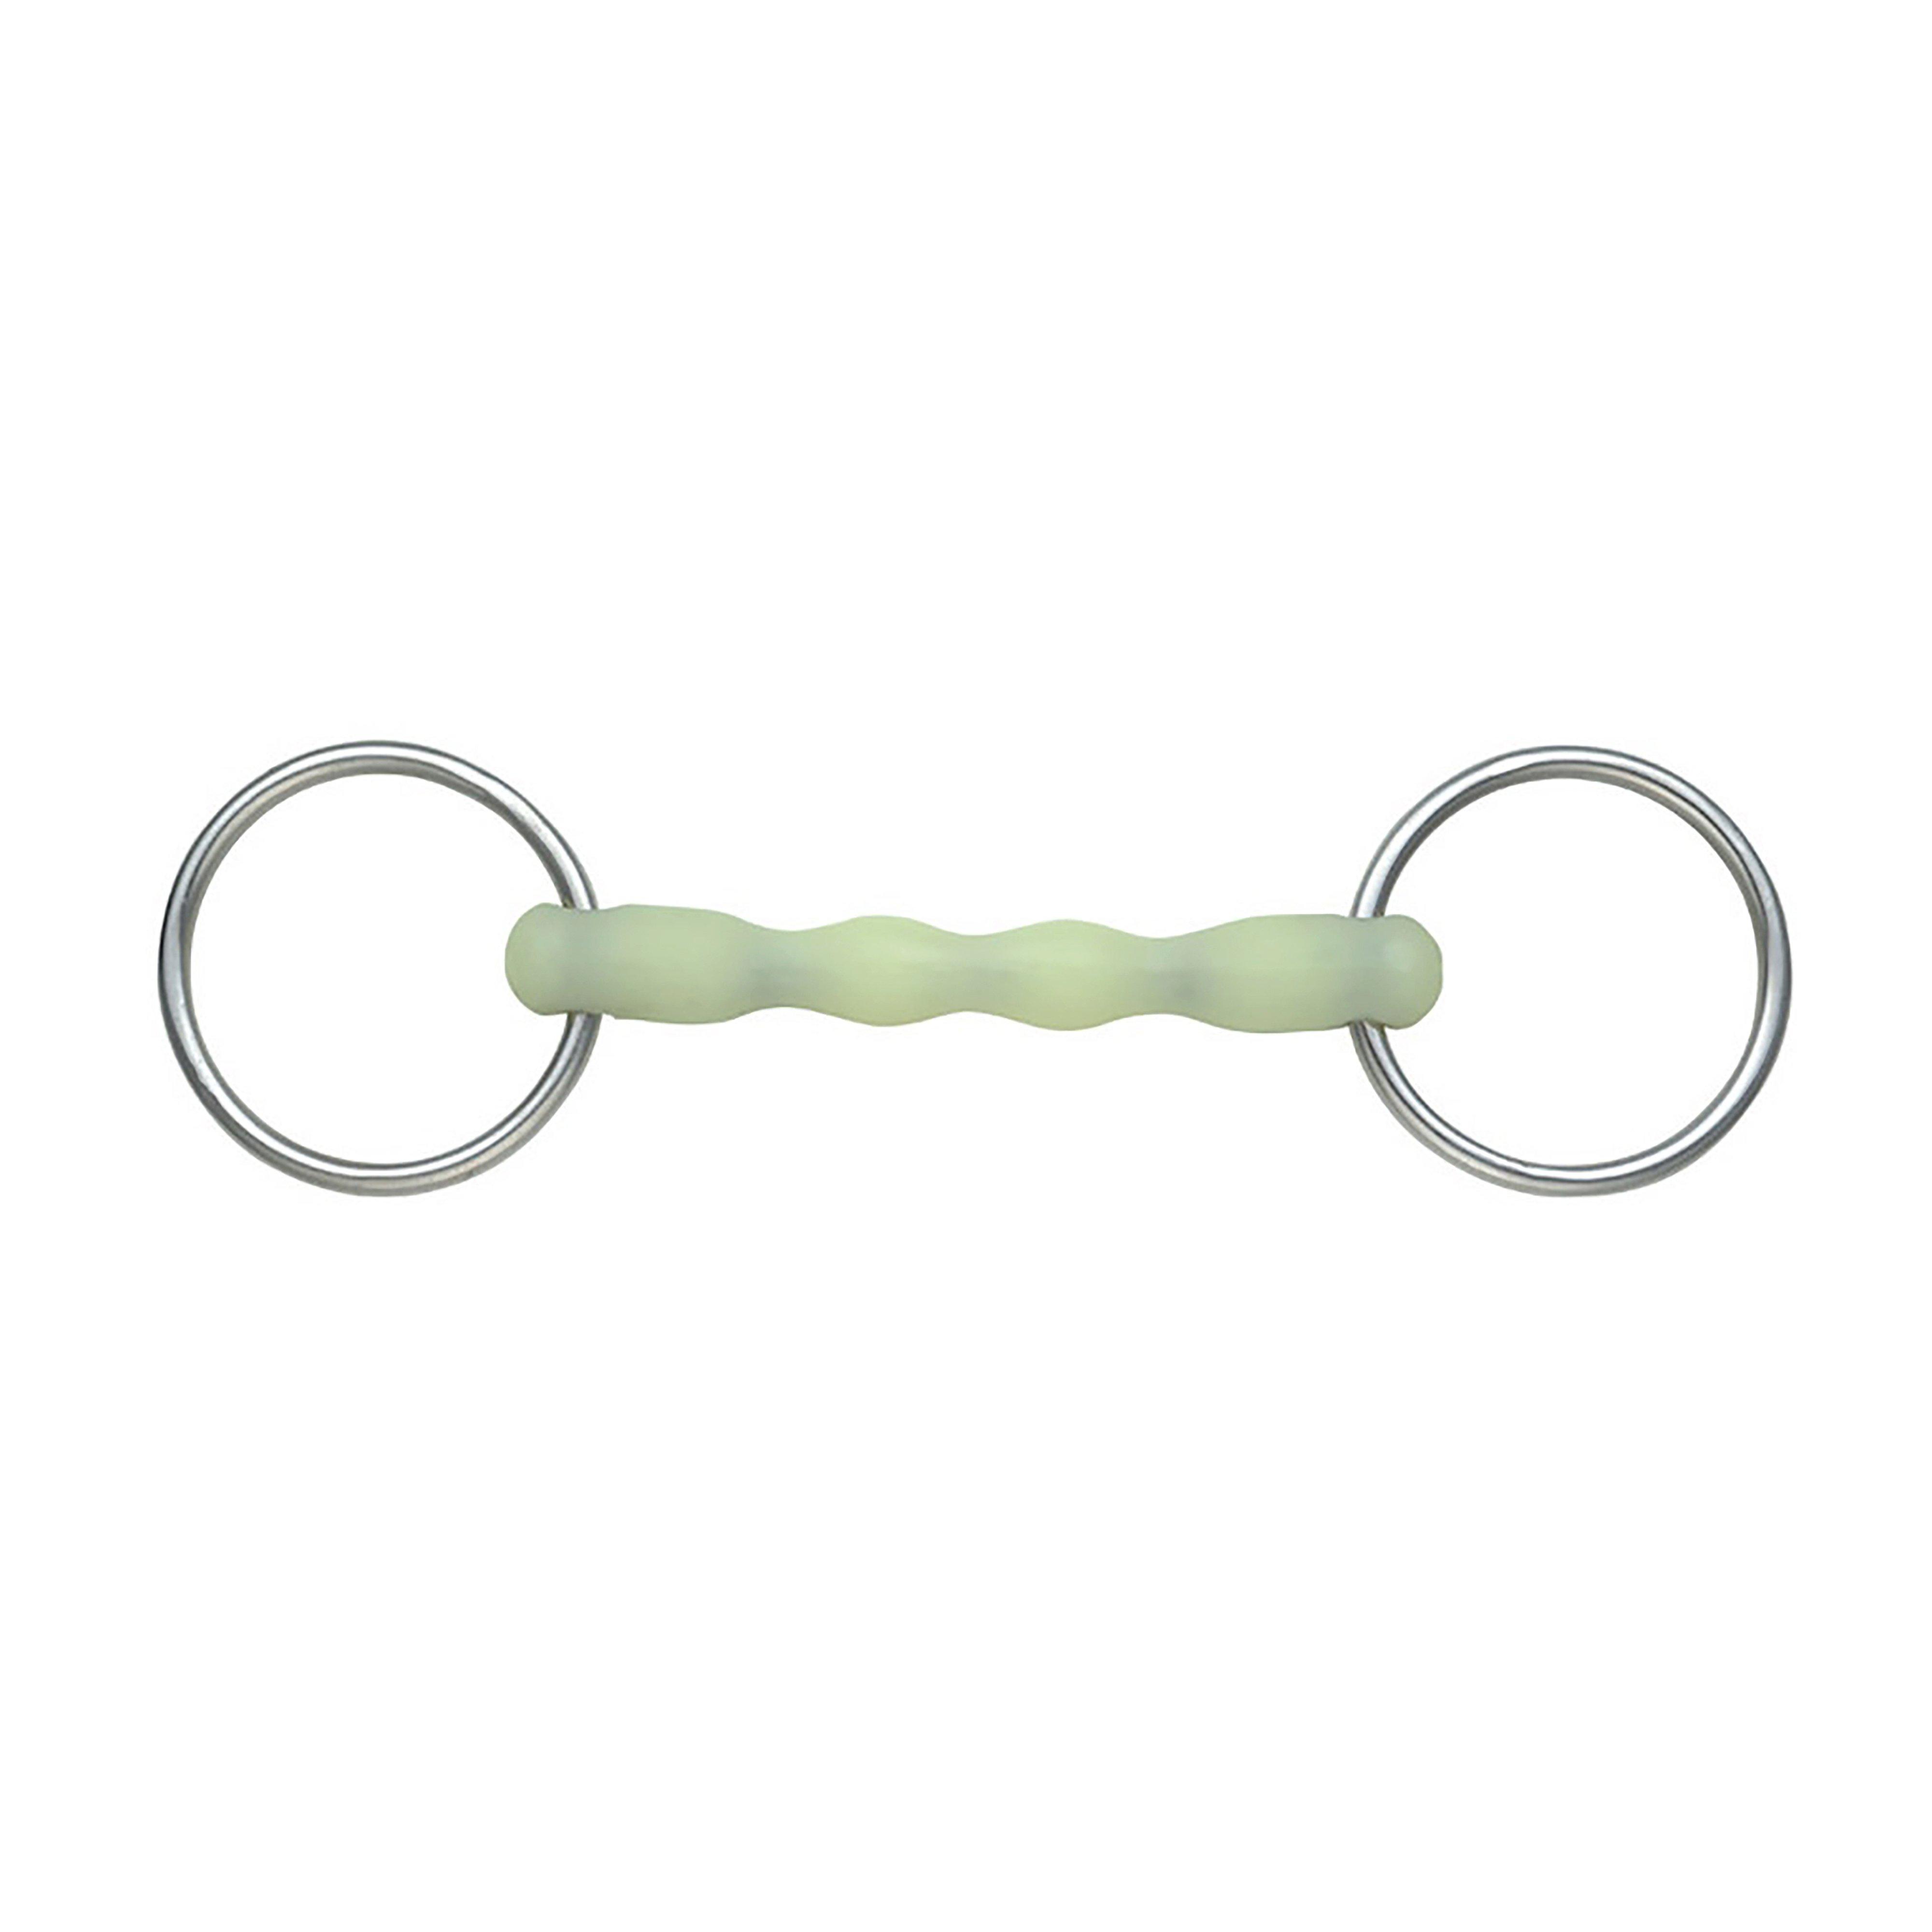 EquiKind Ripple Loose Ring Mullen Mouth Snaffle